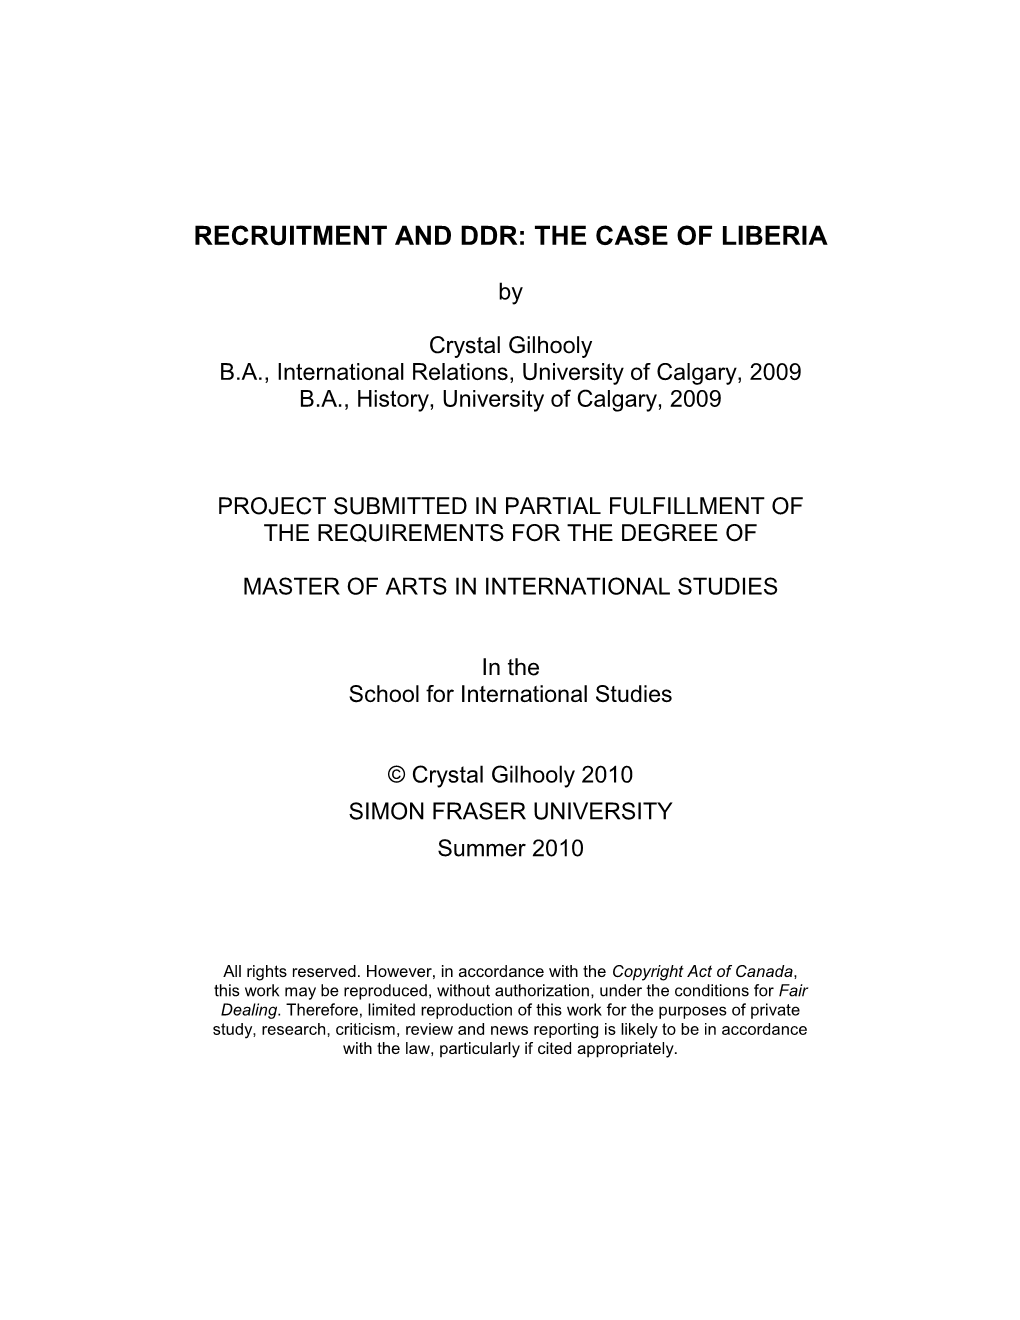 Recruitment and Ddr: the Case of Liberia